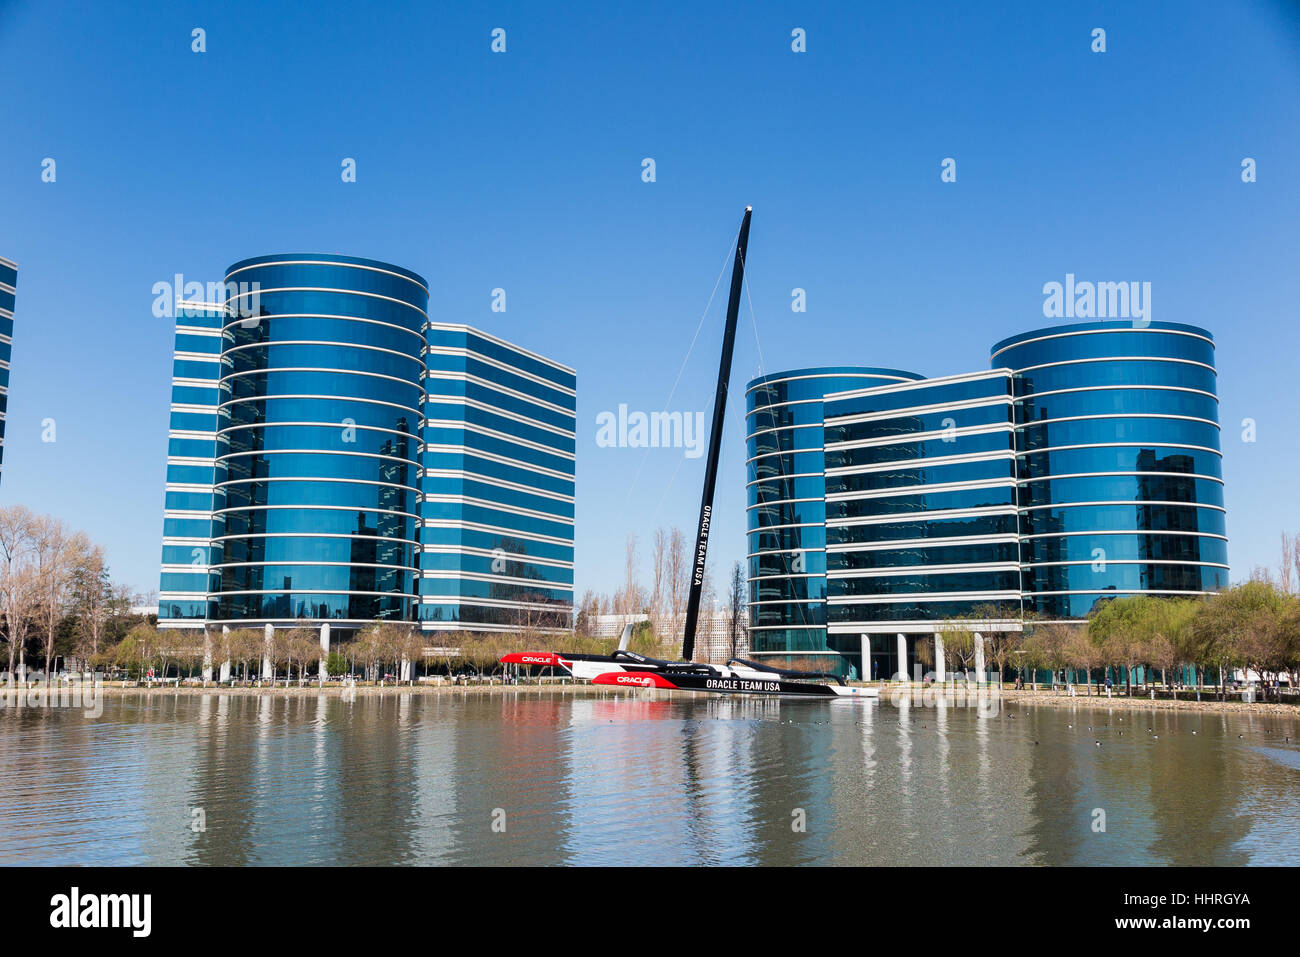 Oracle Corporation headquarters / buildings with a Oracle Team USA yacht  racing boat in a pool at Redwood Shores, California Stock Photo - Alamy